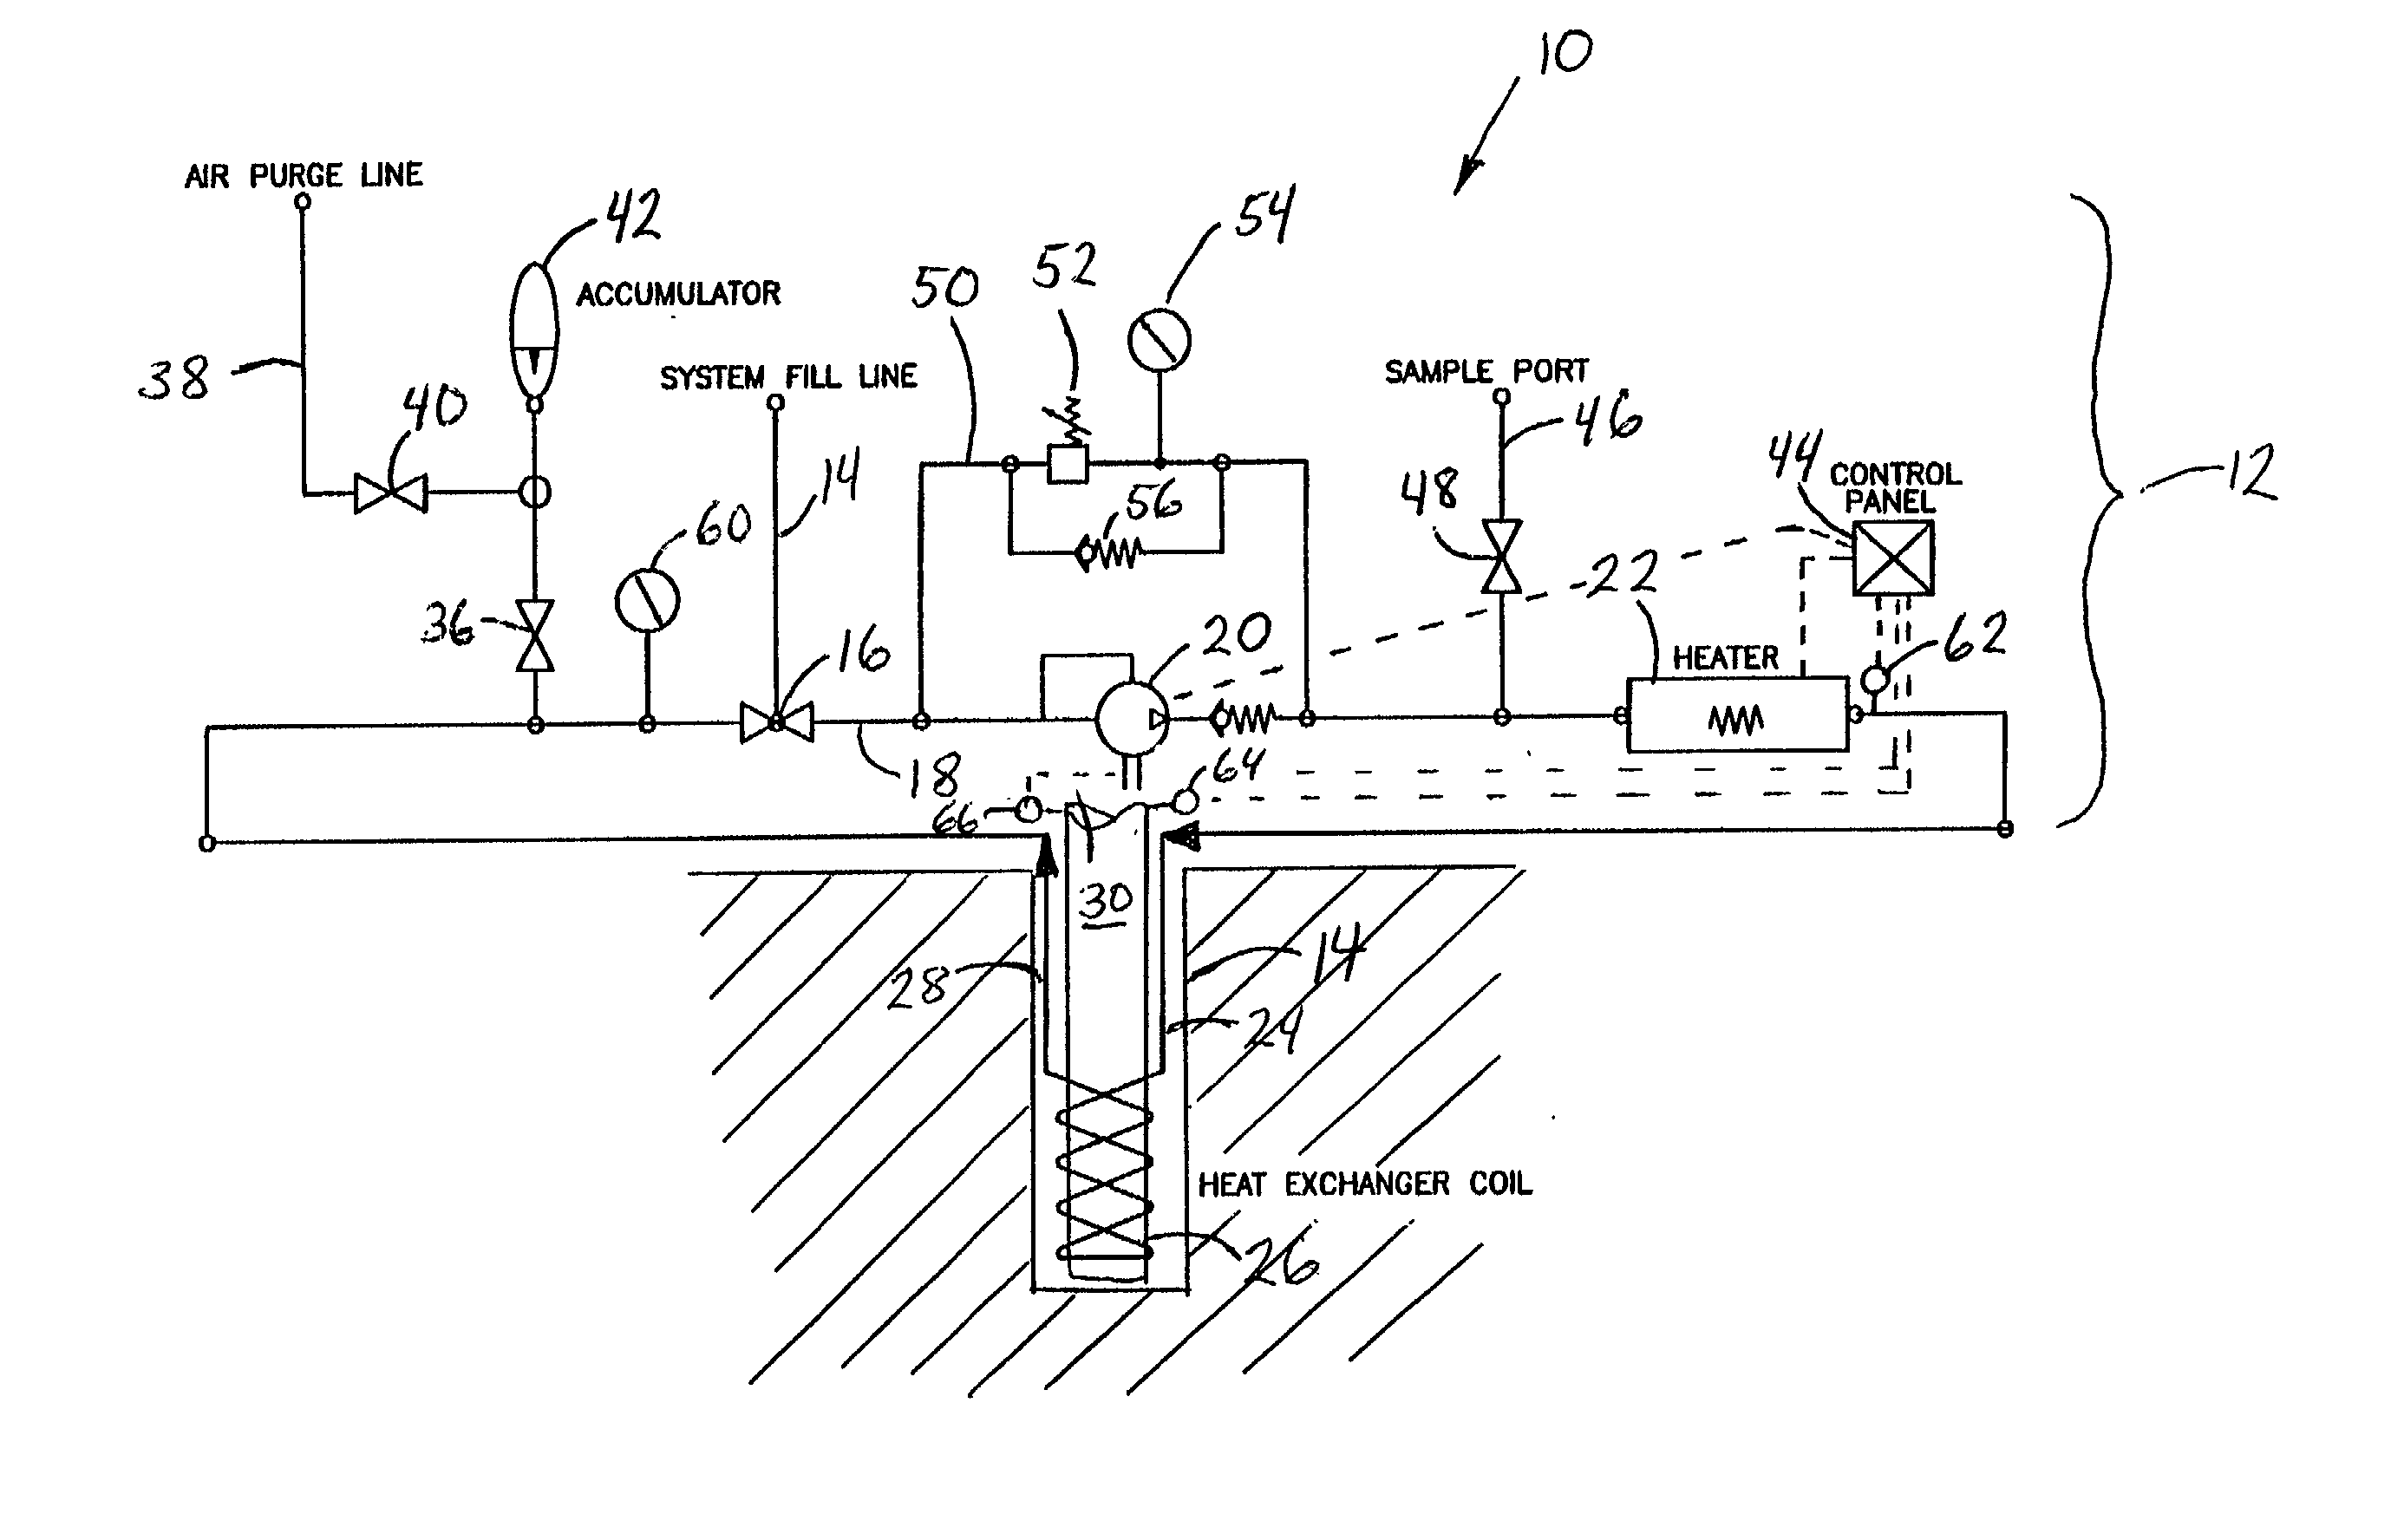 Enhanced oil well production system